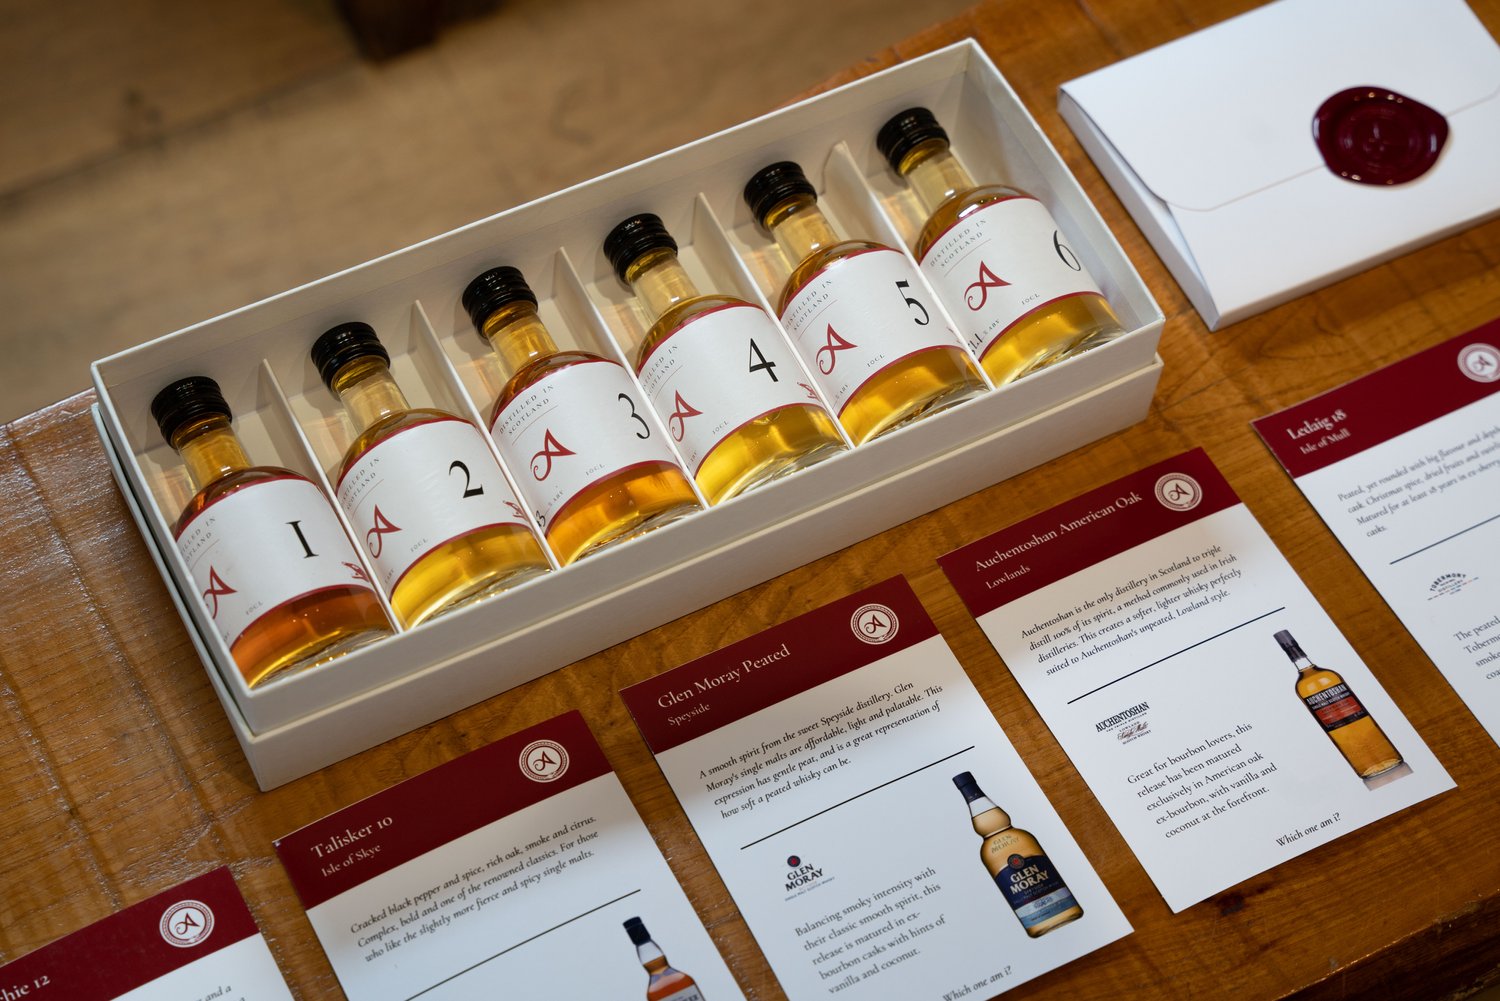 Whisky Tasting Gift Box 10 Malts to Try - A whisky tasting